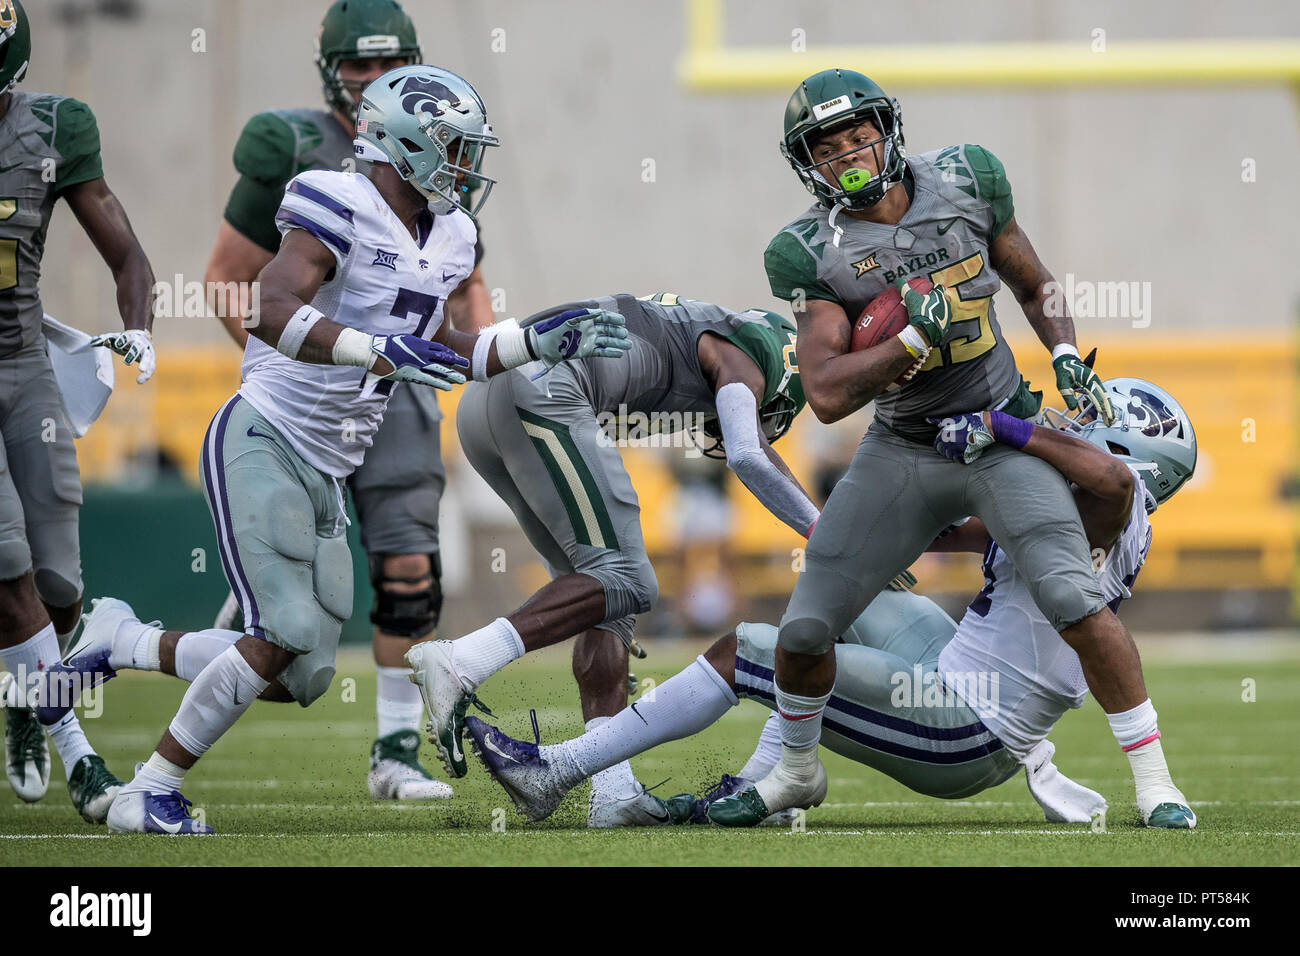 Waco, Texas, USA. 6th Oct, 2018. Baylor Bears running back Trestan Ebner (25) struggles for positive yardage during the NCAA football game between the Kansas State Wildcats and the Baylor Bears at McLane Stadium in Waco, Texas. Baylor defeated Kansas State 37-34. Prentice C. James/CSM/Alamy Live News Stock Photo